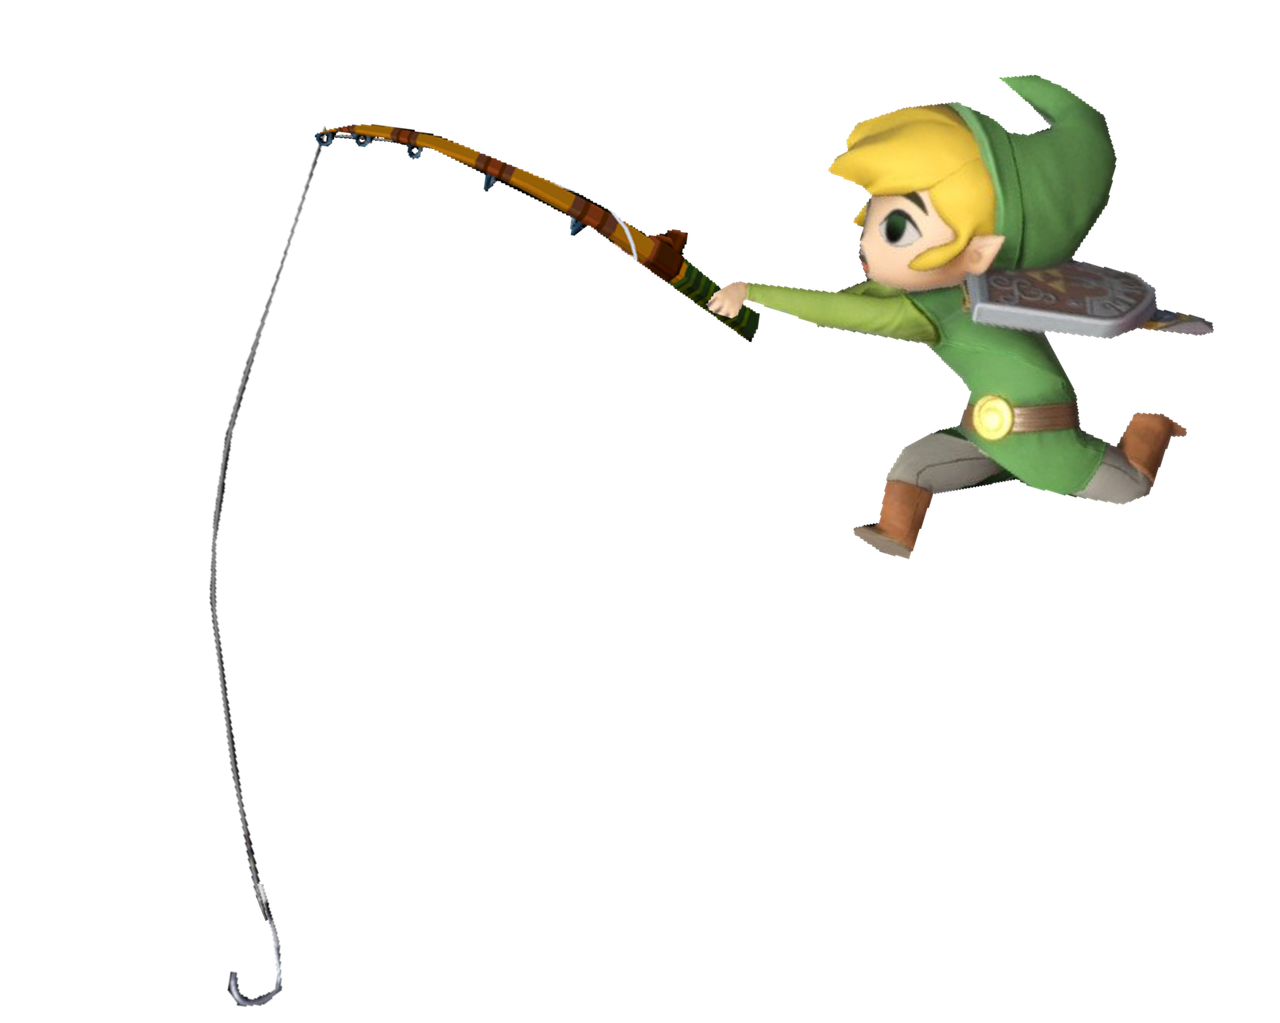 Toon Link using a fishing rod 2 by TransparentJiggly64 on DeviantArt